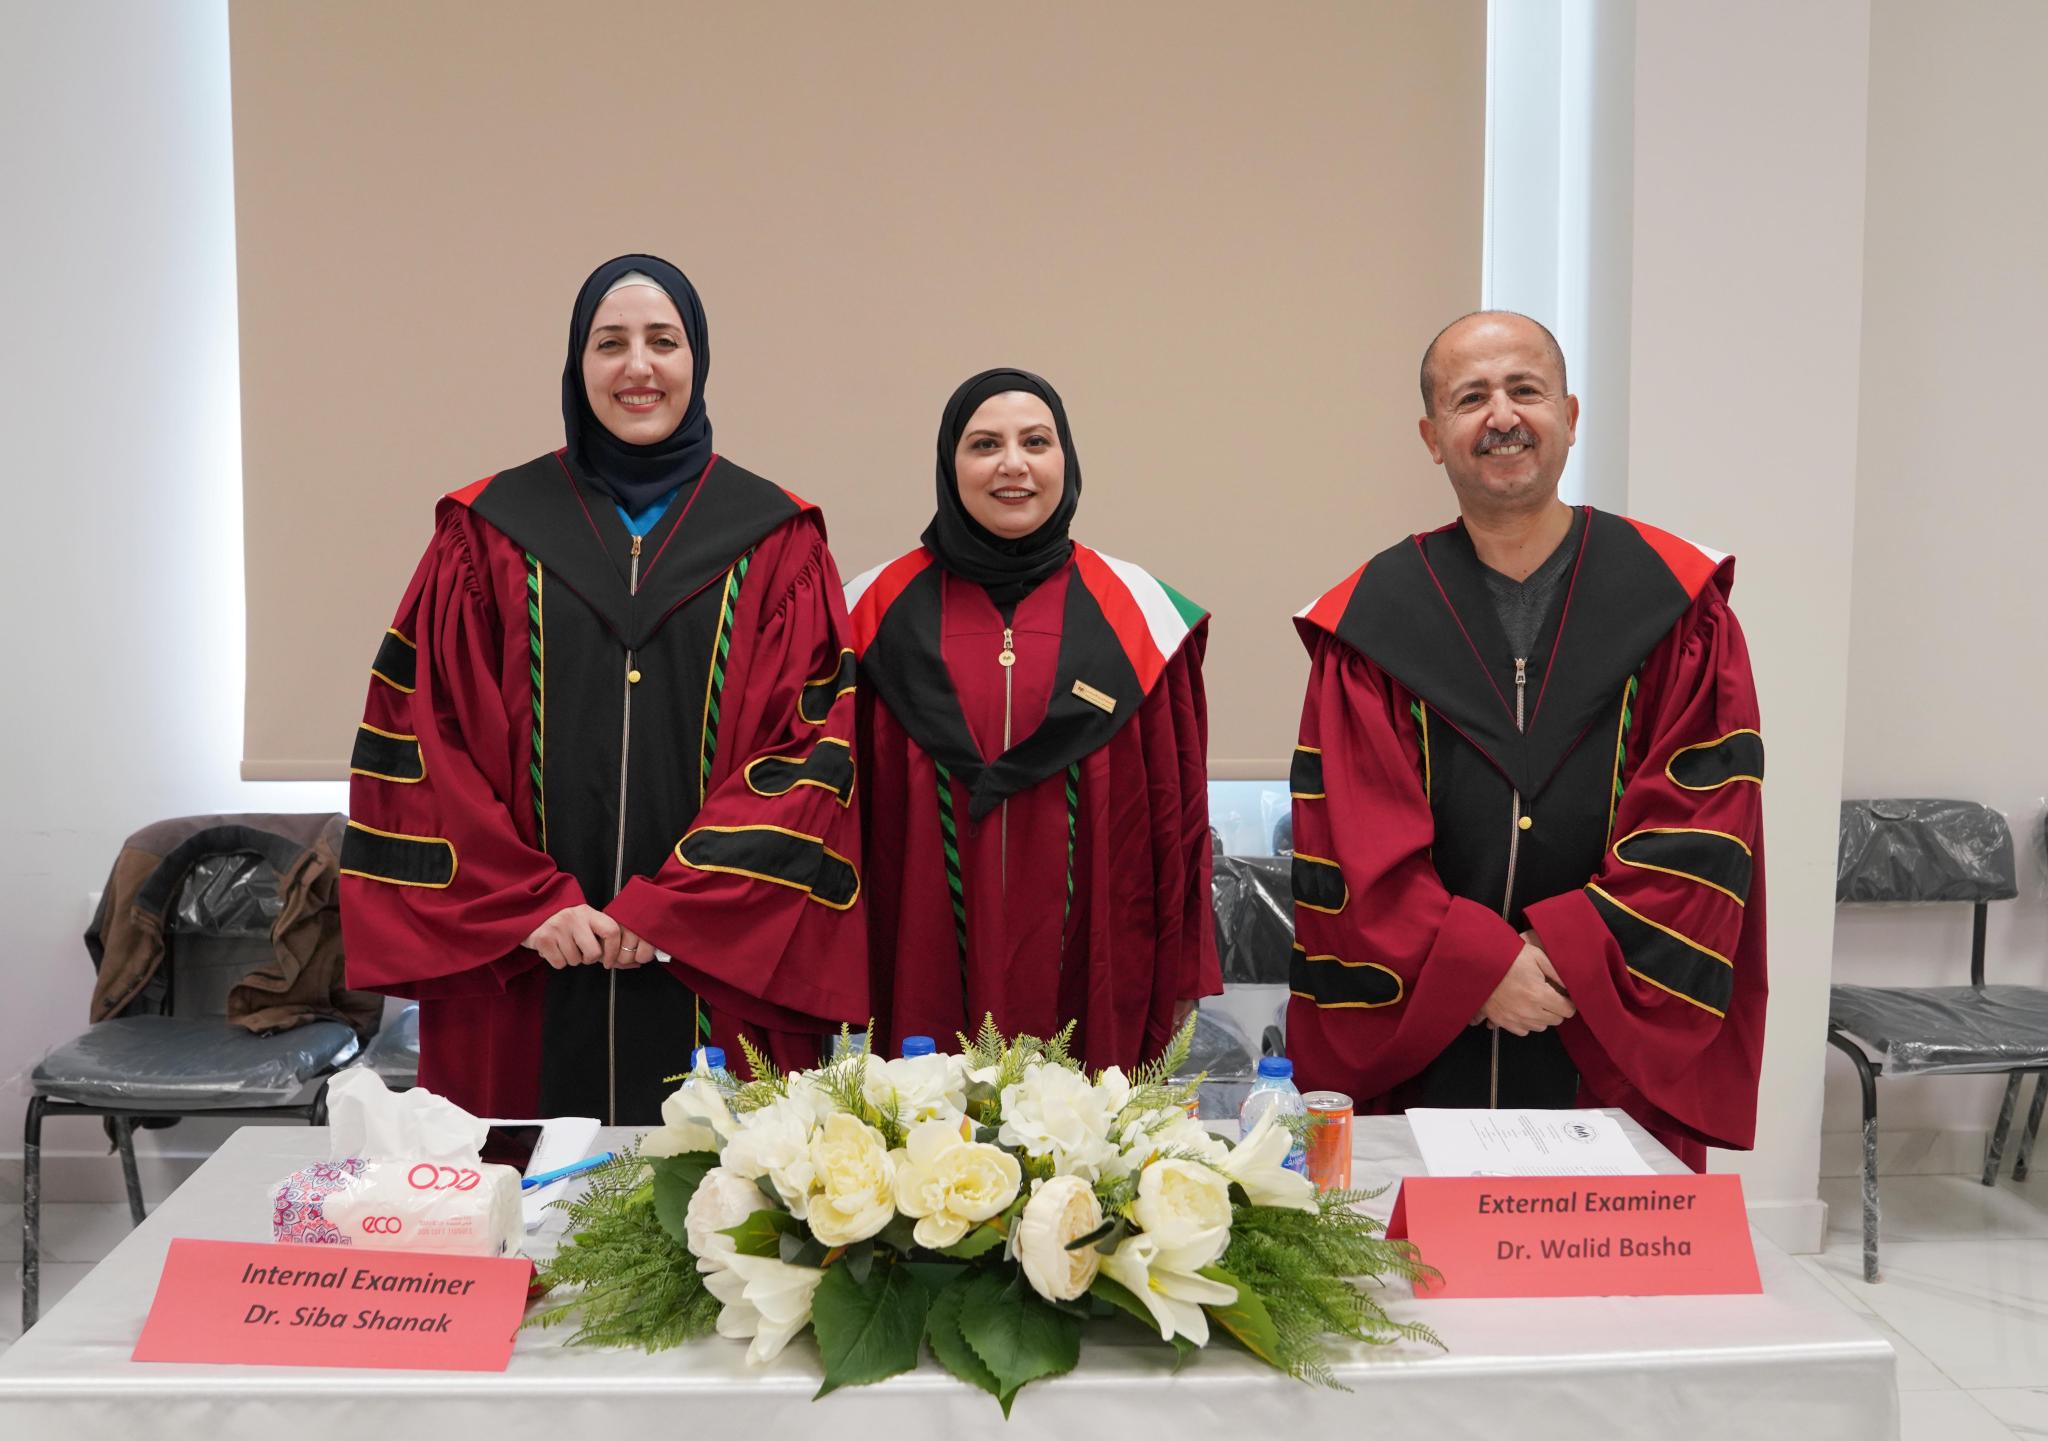 Defense of a Master’s Thesis on the Effect of Honey on Breast Cancer Cells at the Arab American University